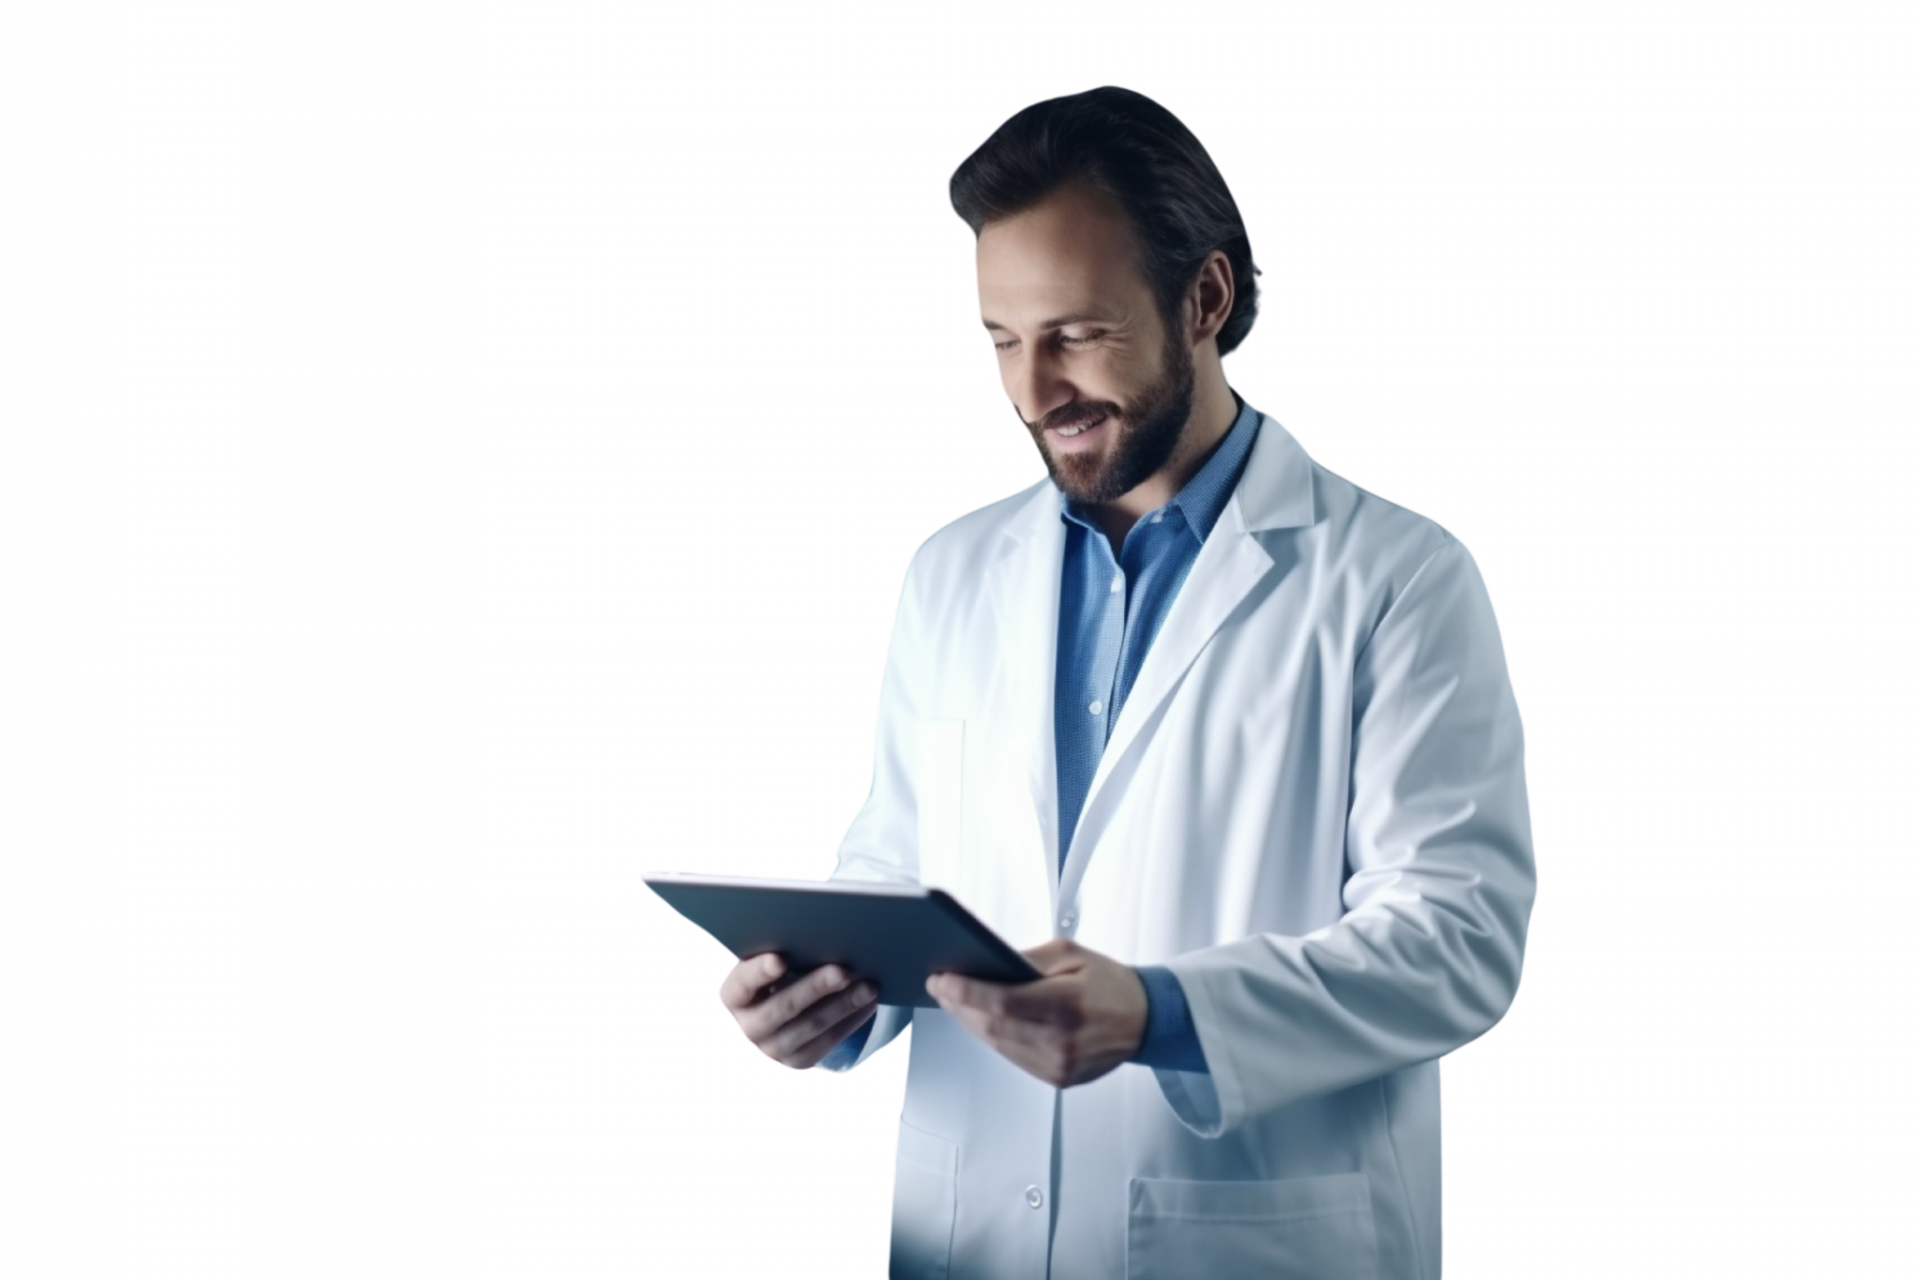 Scientist in a lab coat smiling while using a tablet.